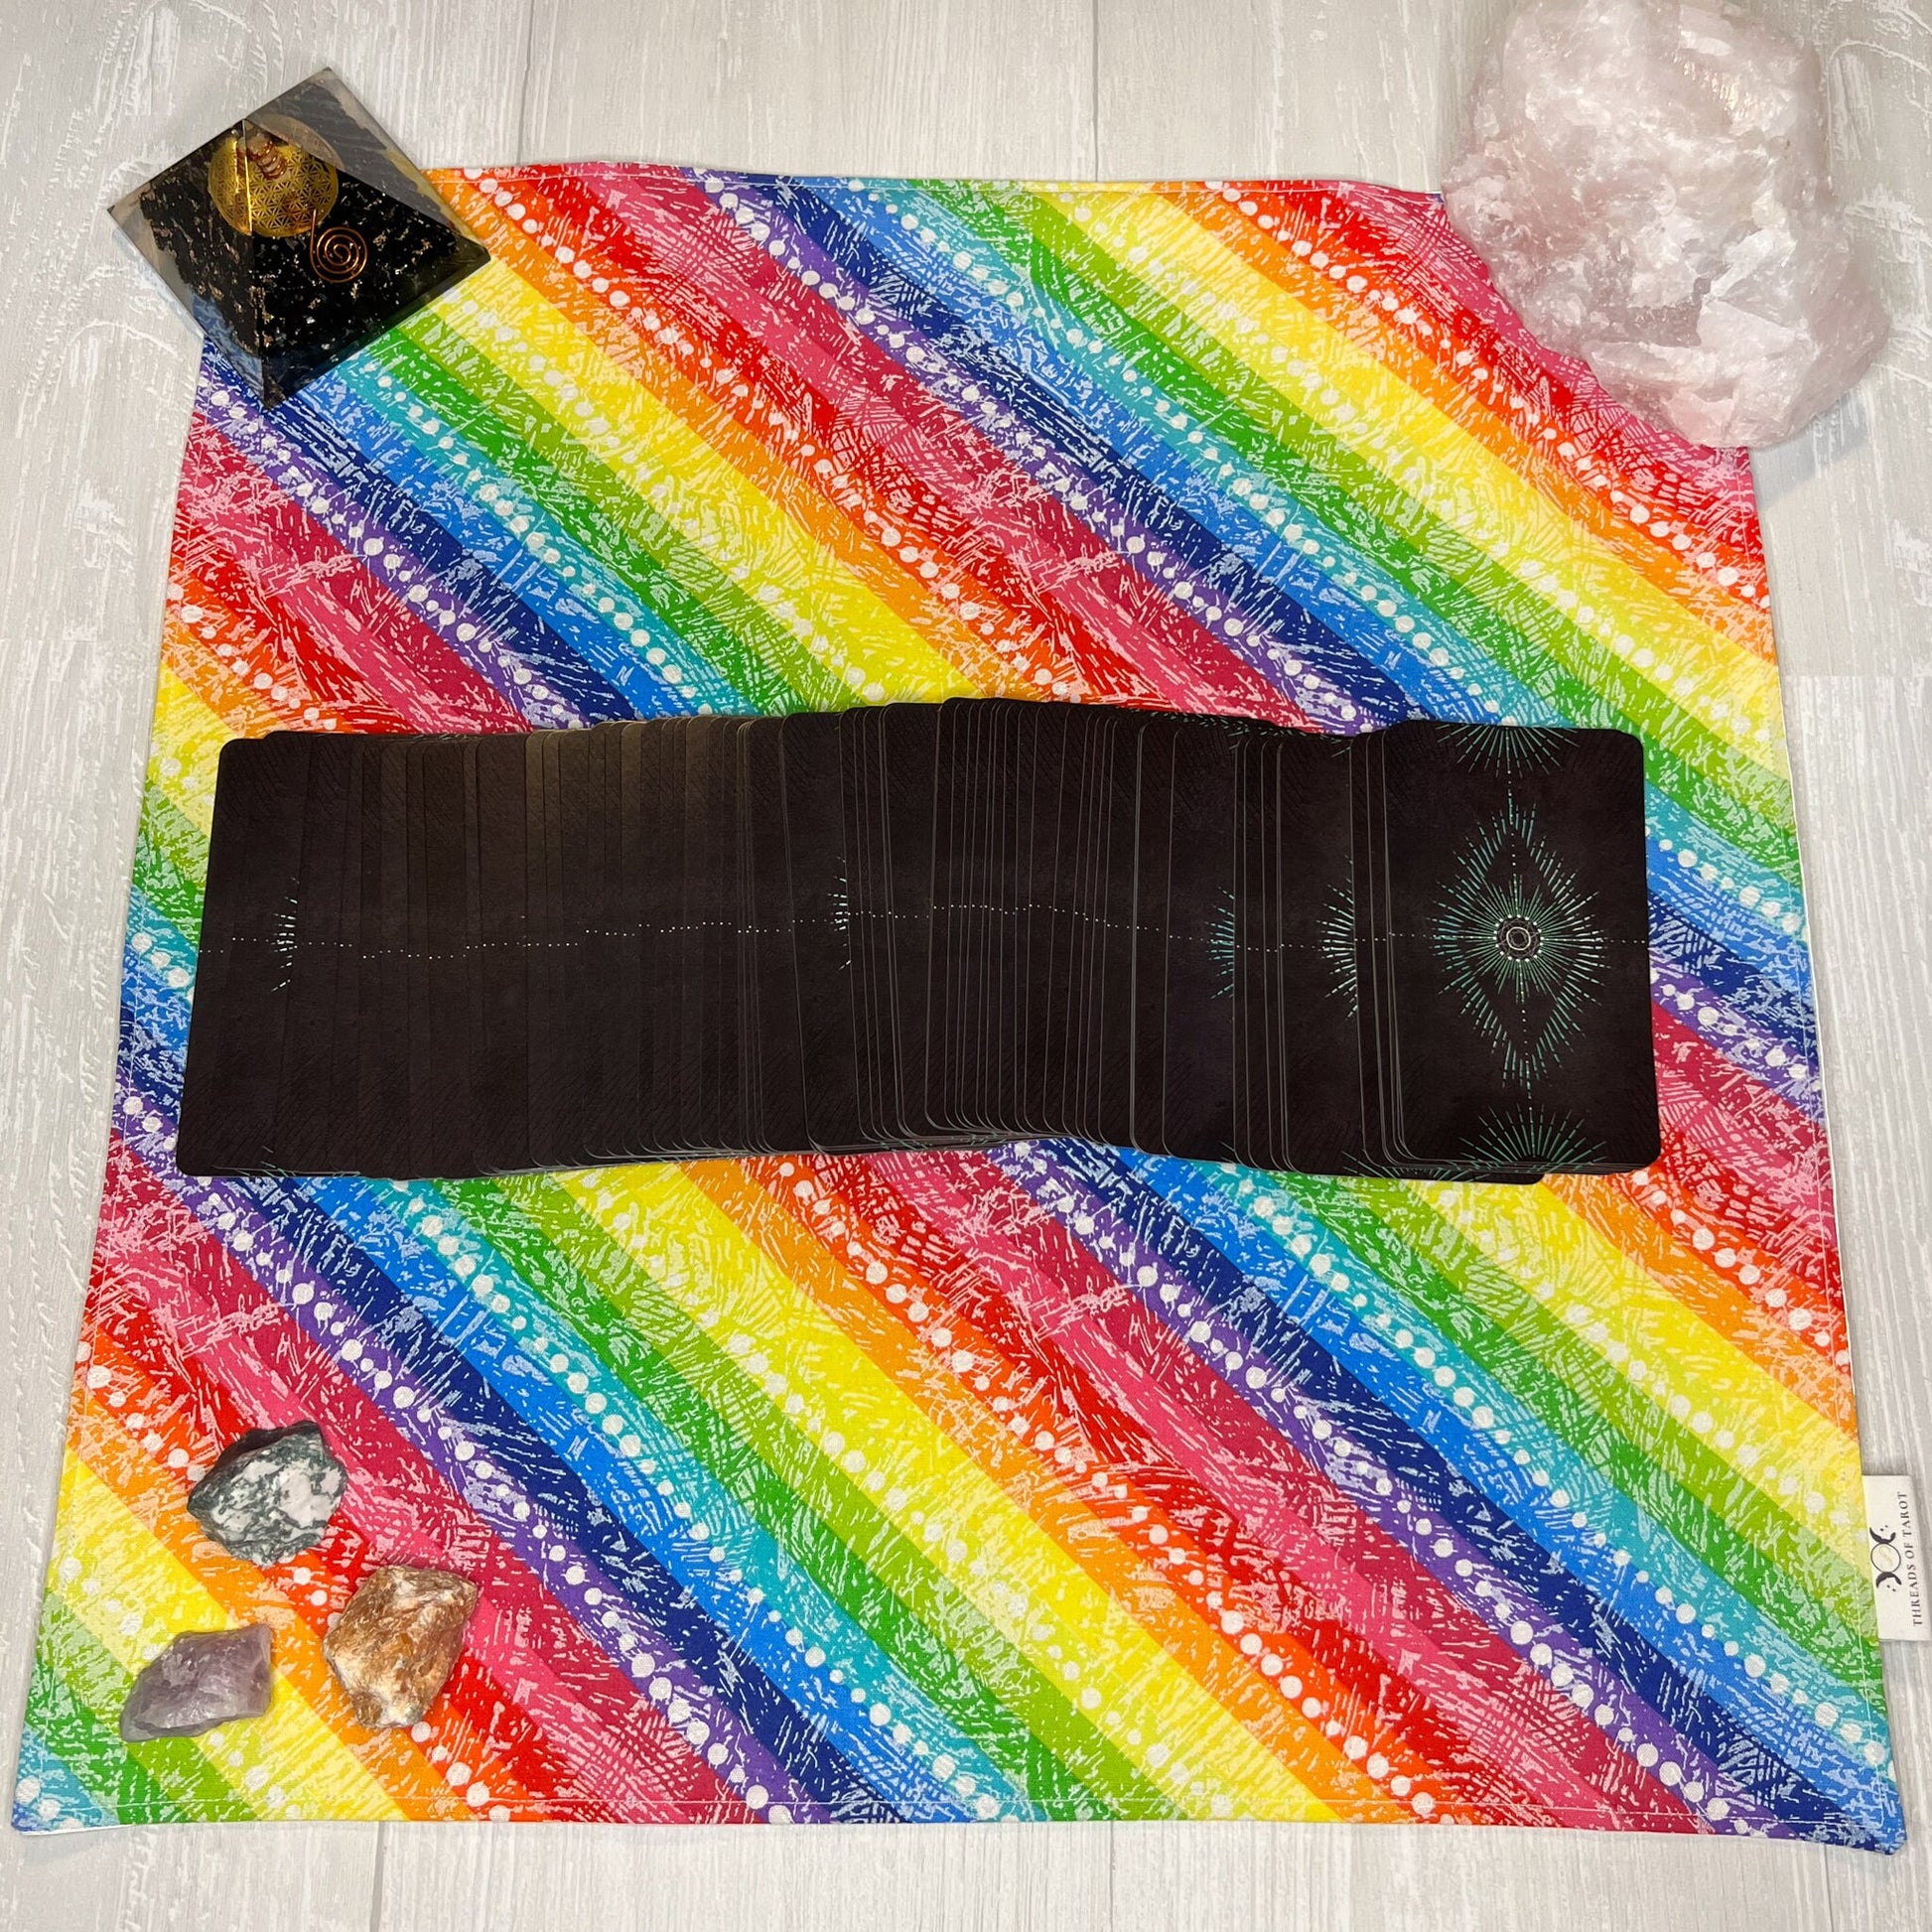 Striped Rainbow Altar Cloth, Tarot Cloth, Tarot Reading Supplies and Accessories, Rune & Charm Casting Cloth, Pagan Witch Tarot Reader Gift